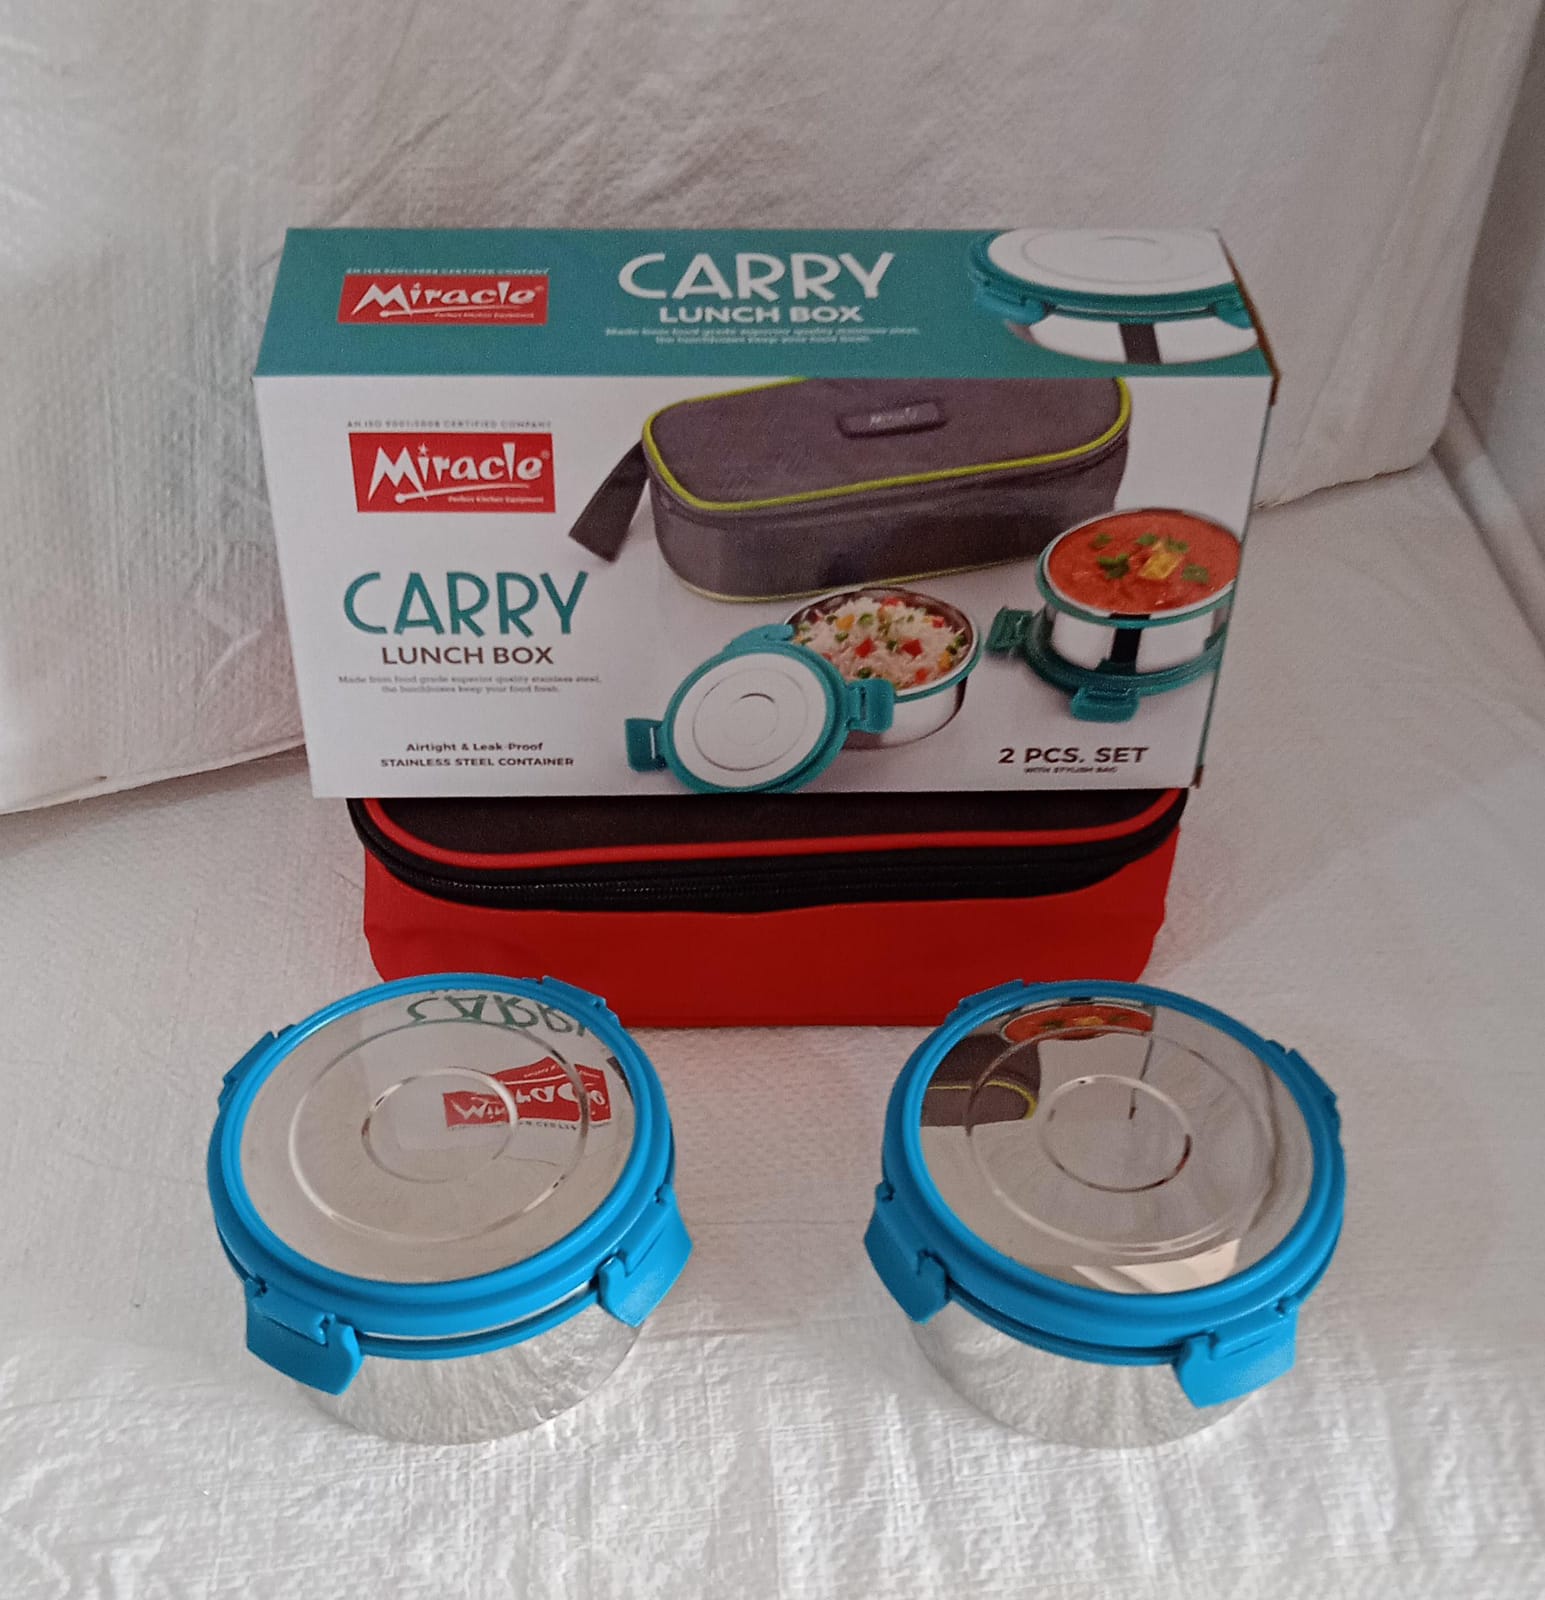 5588 Miracle Carry Lunch Box Microwave Safe Lunch Box With Insulated Bag 2 Compartment Lunch Box (400 ML / 2 pc)